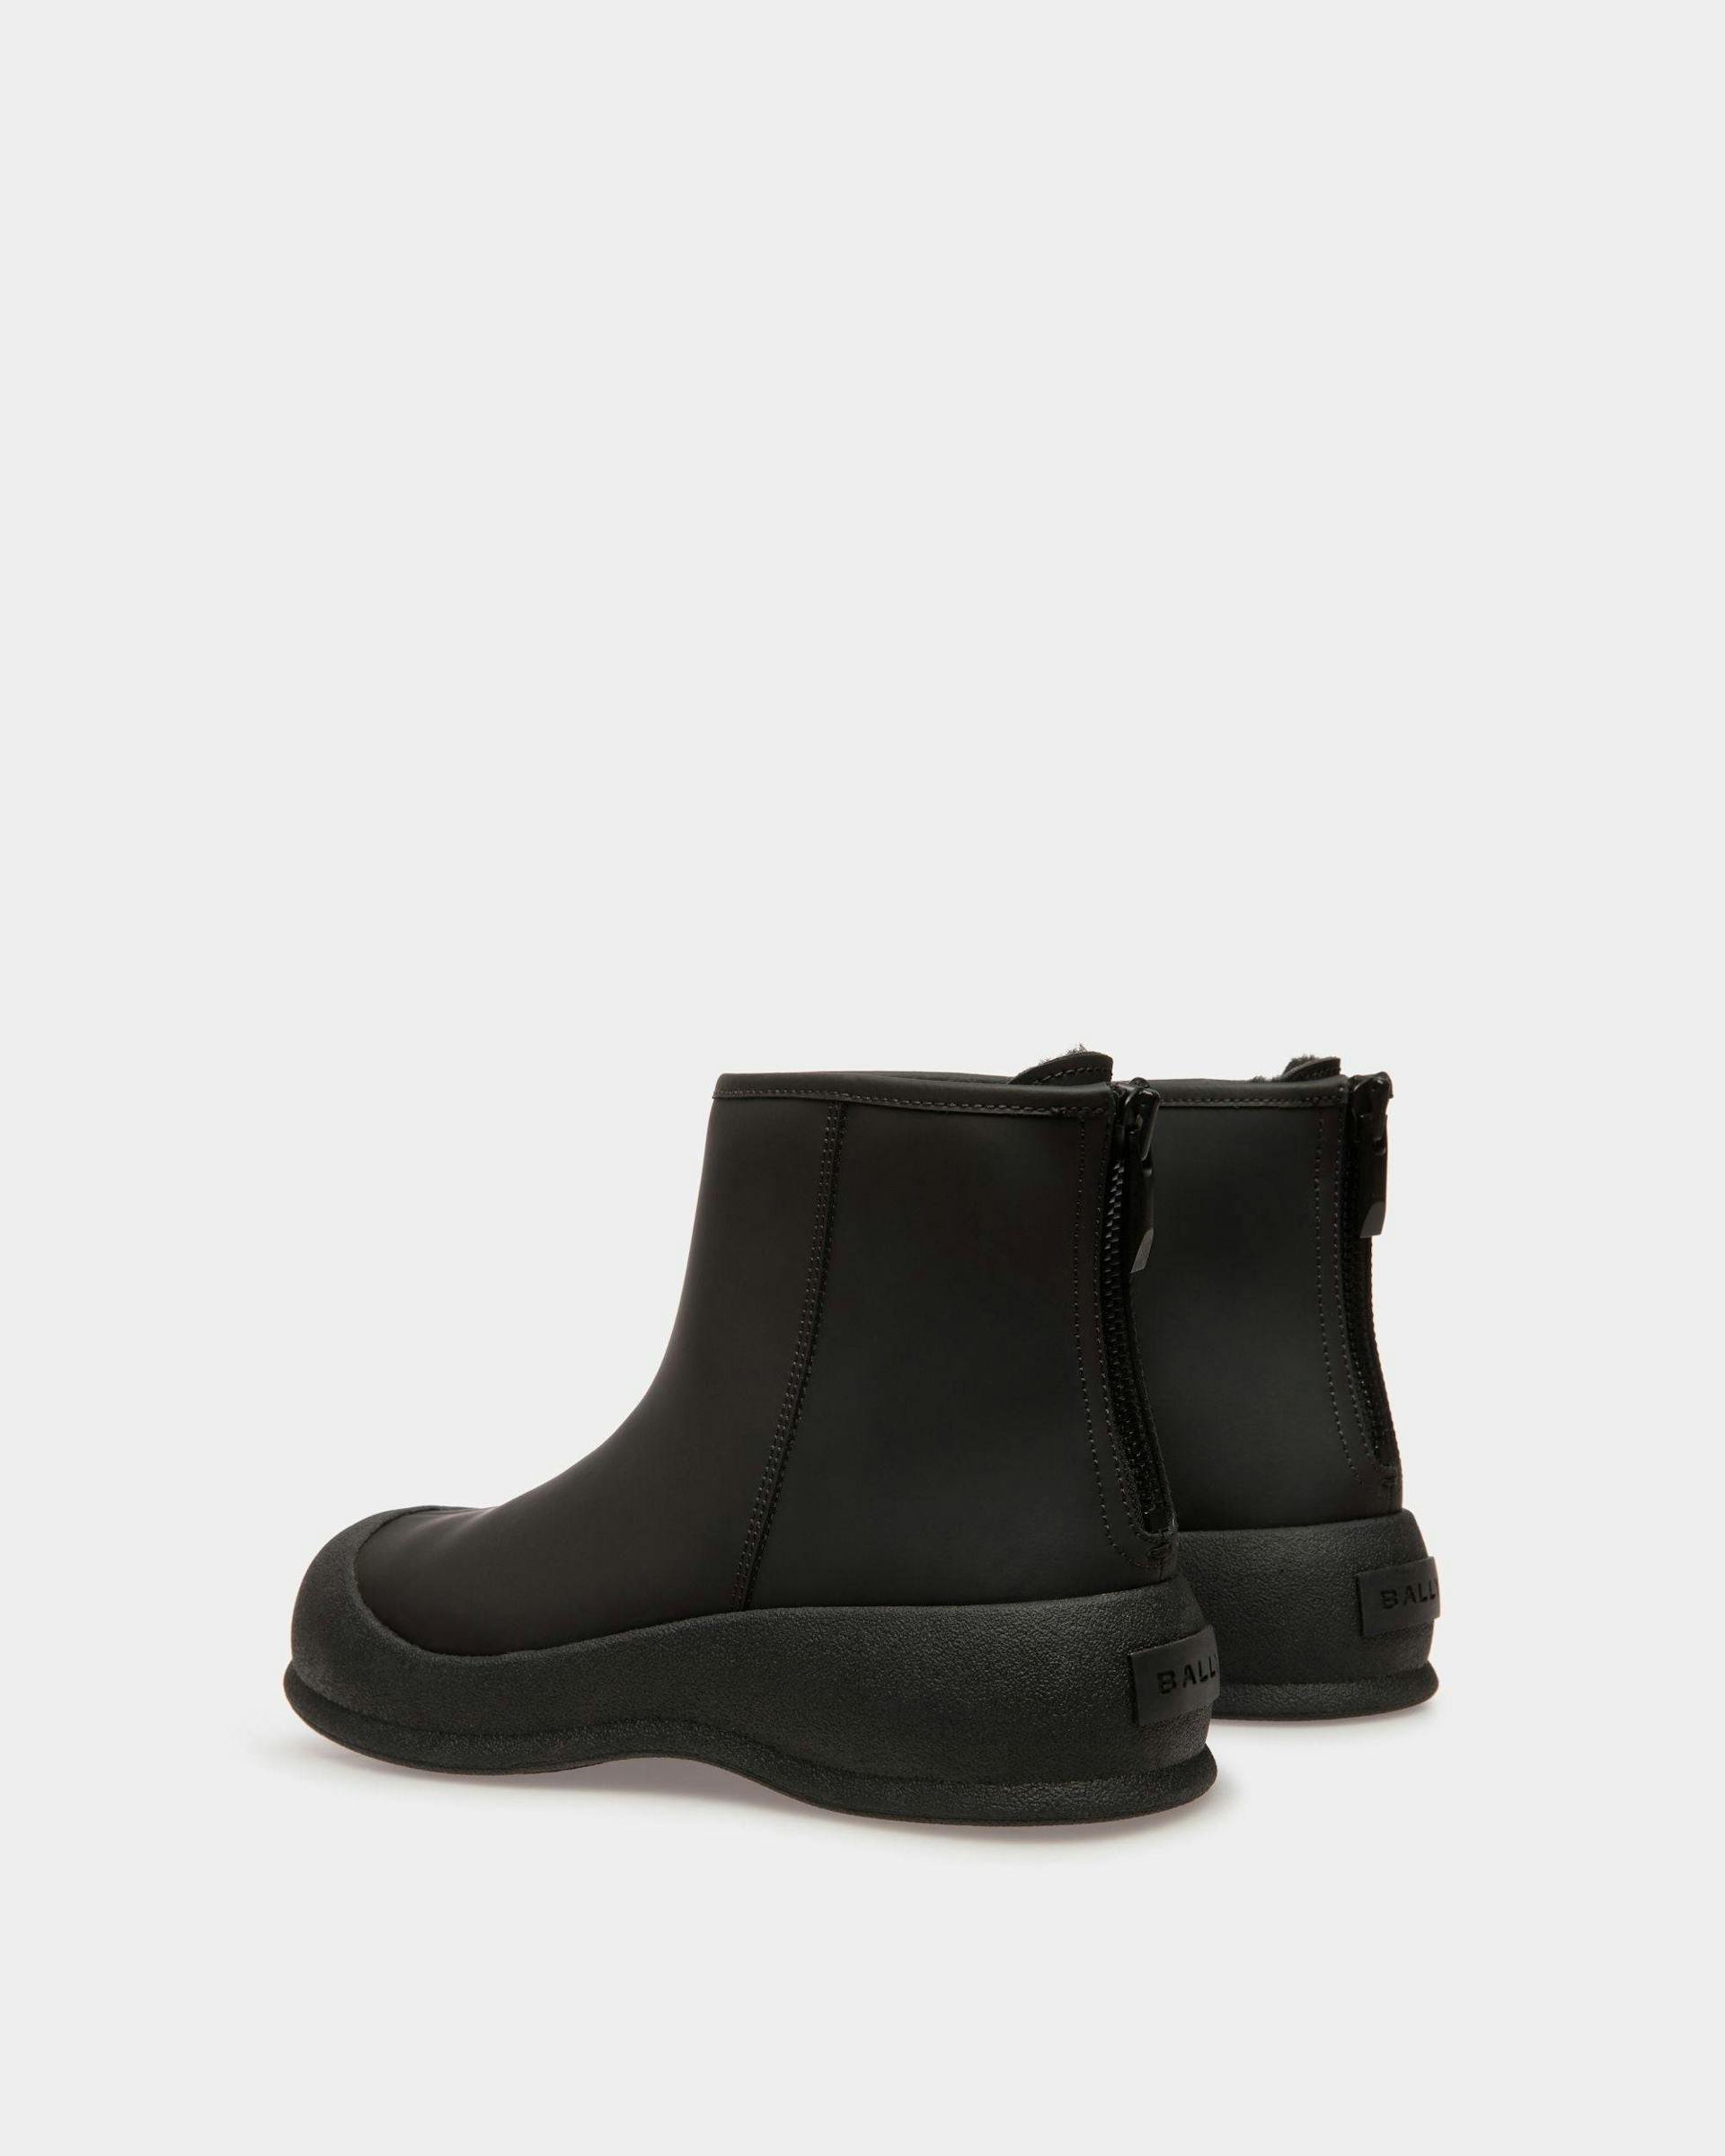 Women's Frei Snow Boots In Black Leather | Bally | Still Life 3/4 Back